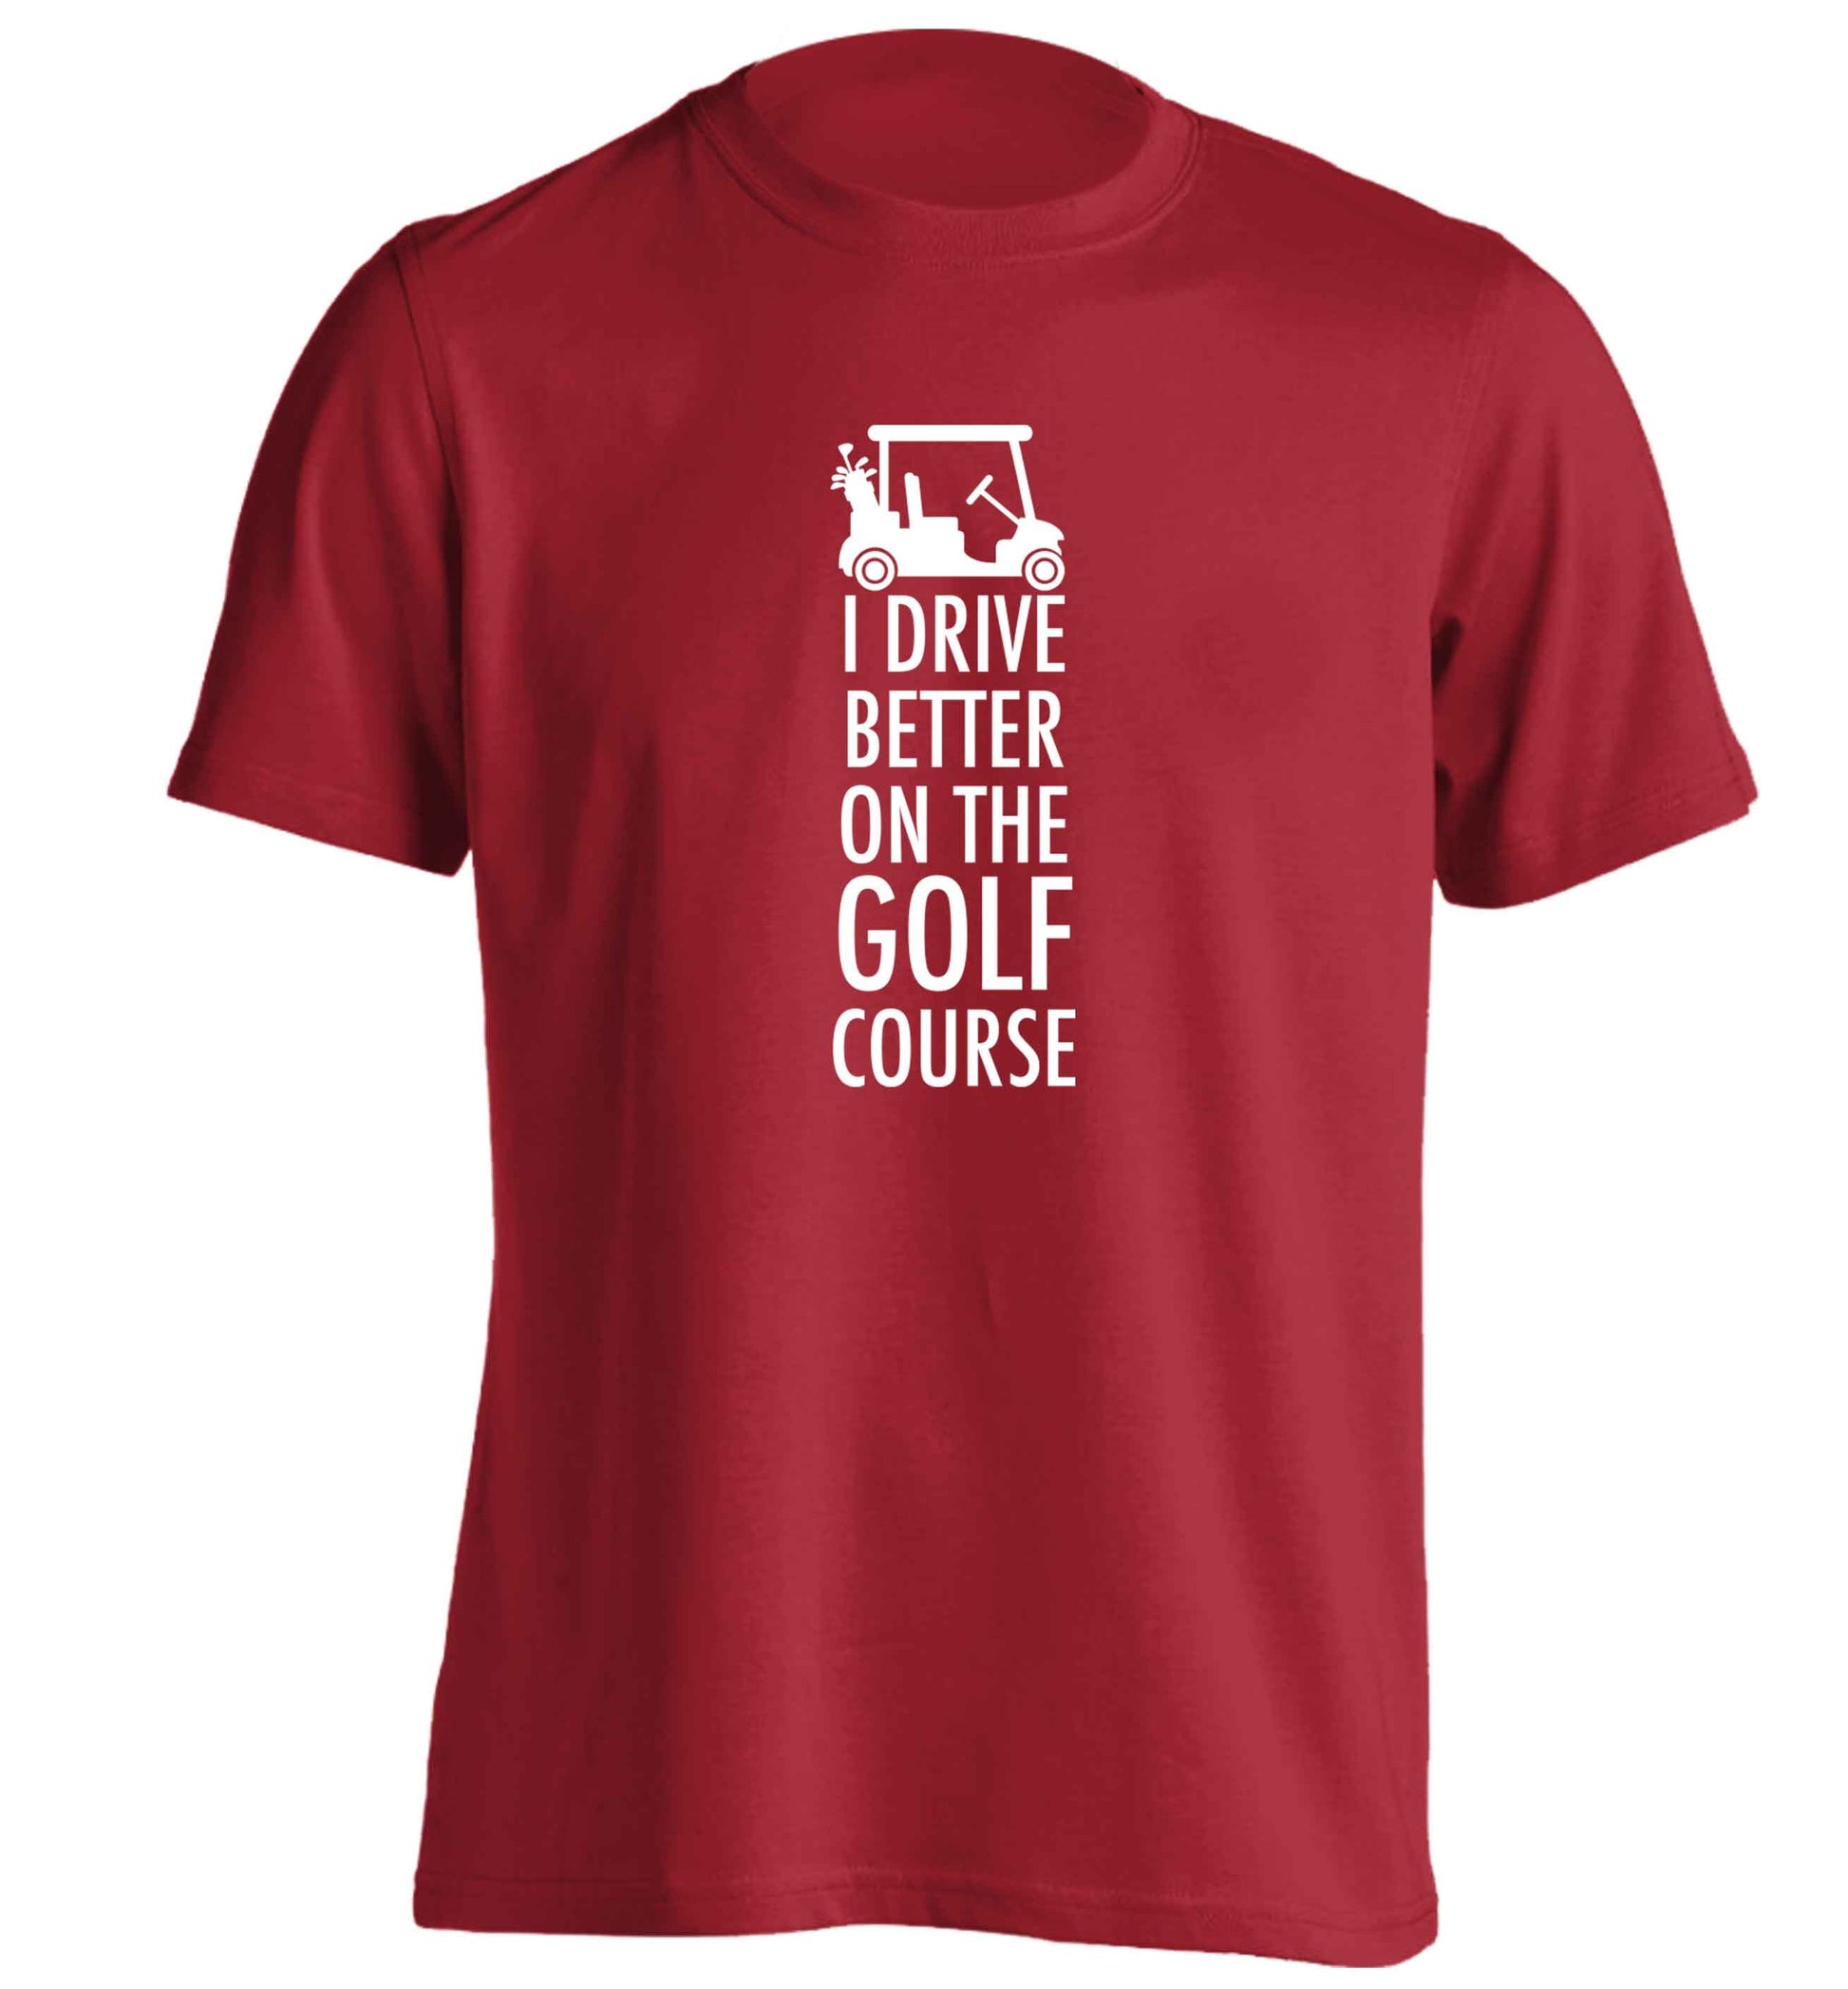 I drive better on the golf course adults unisex red Tshirt 2XL